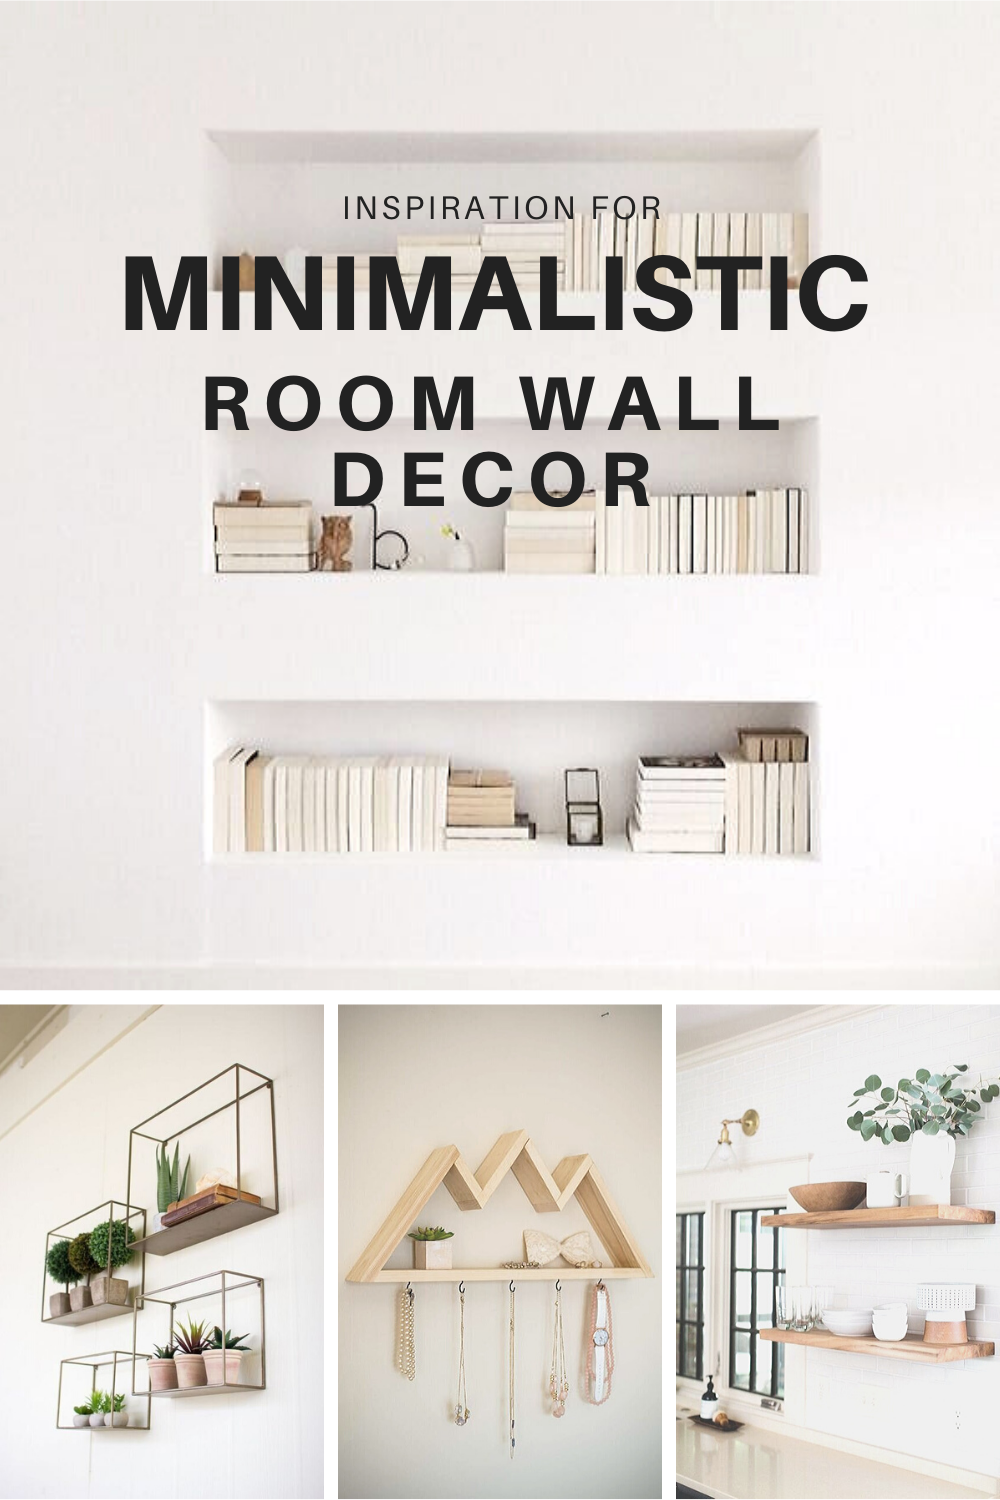 Inspiration for Minimalistic Room Wall Decor1.png